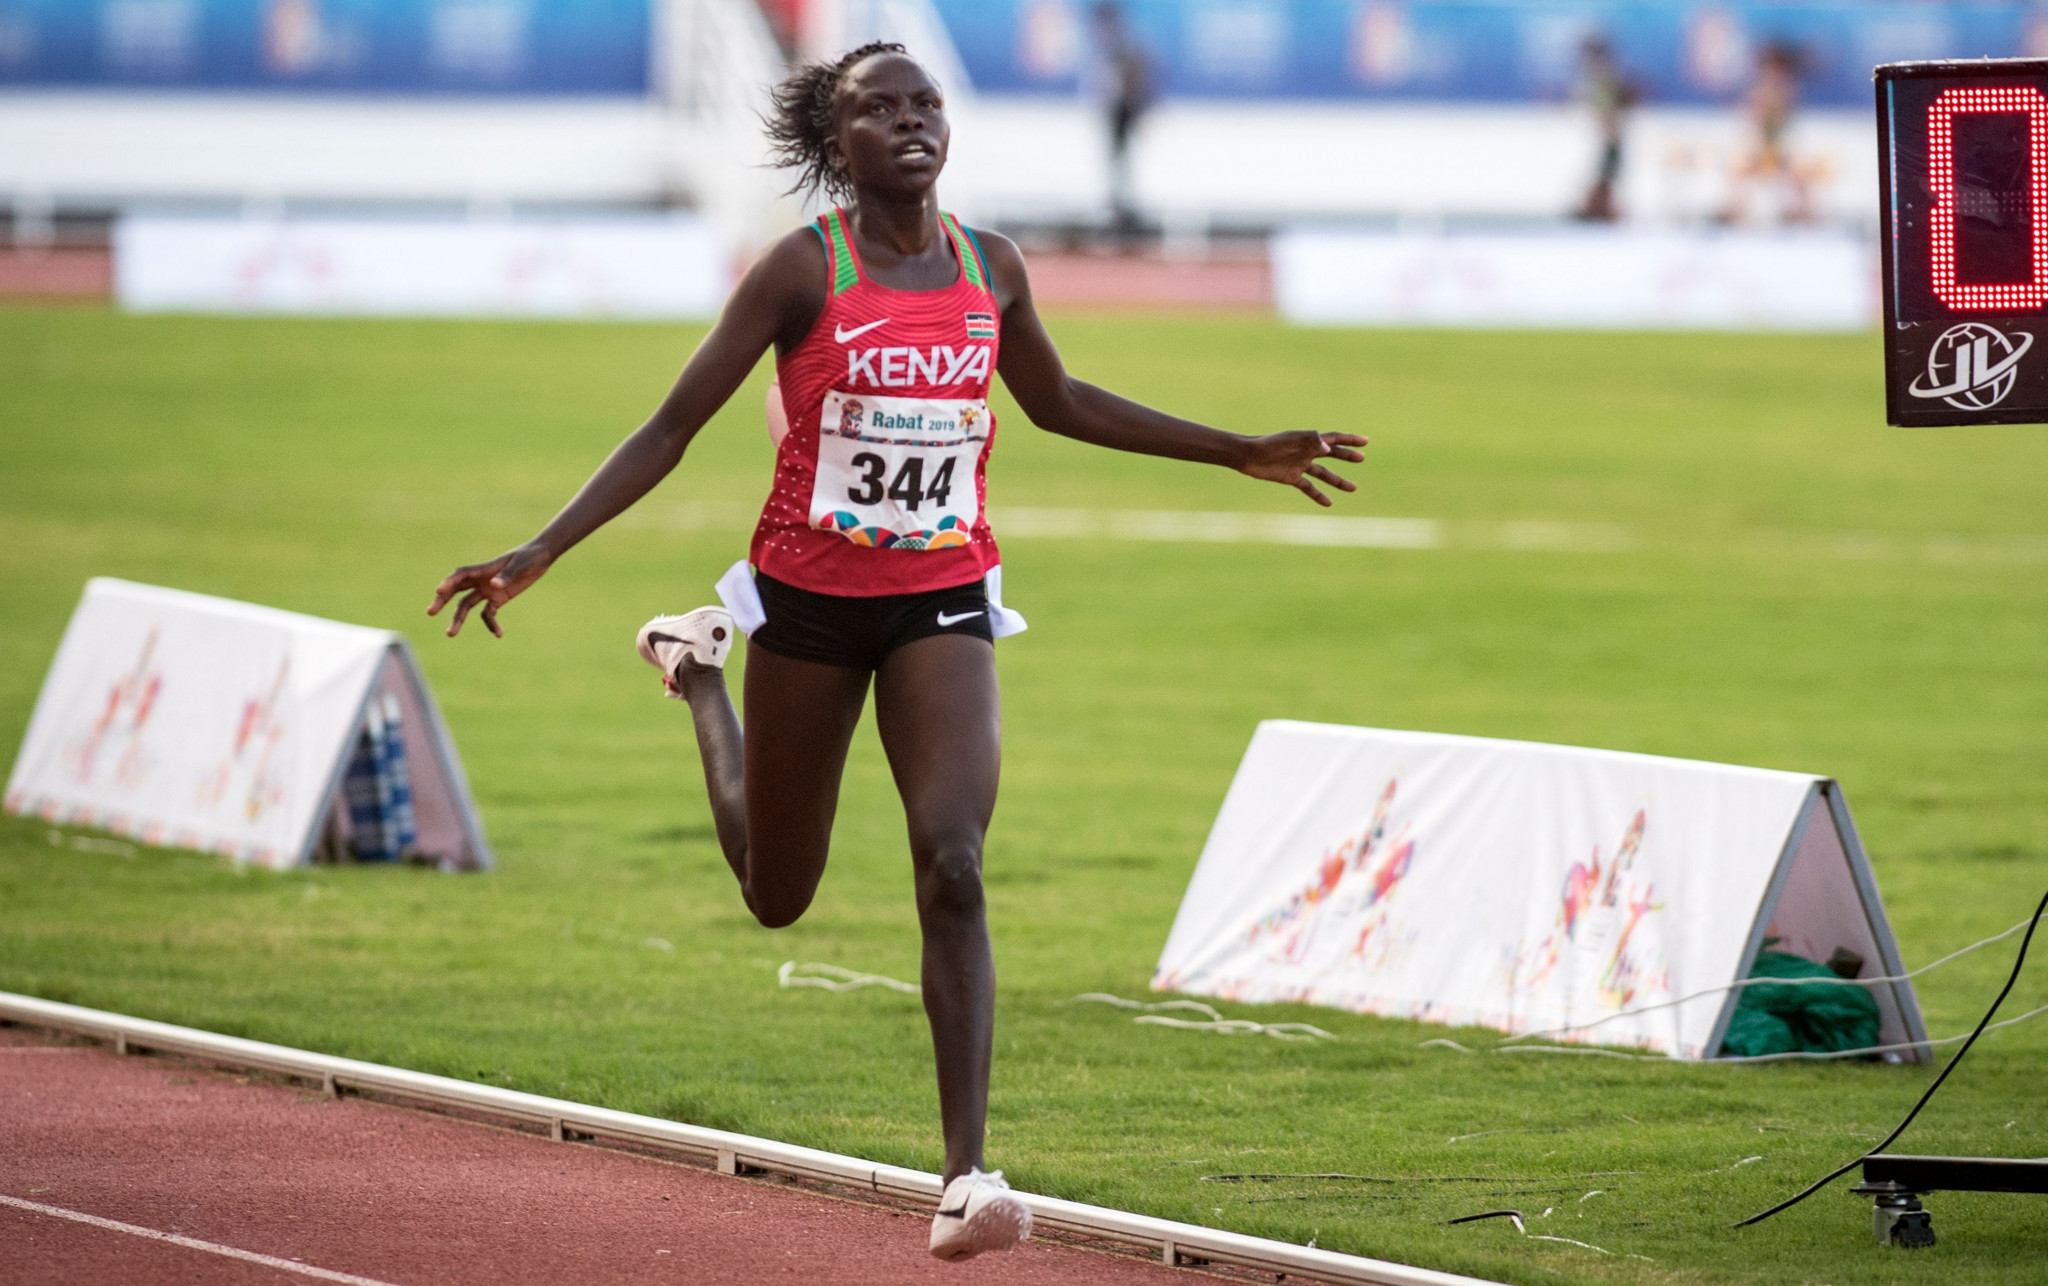 Athletics Kenya has brought events on its calendar forward to allow enough time to prepare for next year's rearranged African Games ©Getty Images